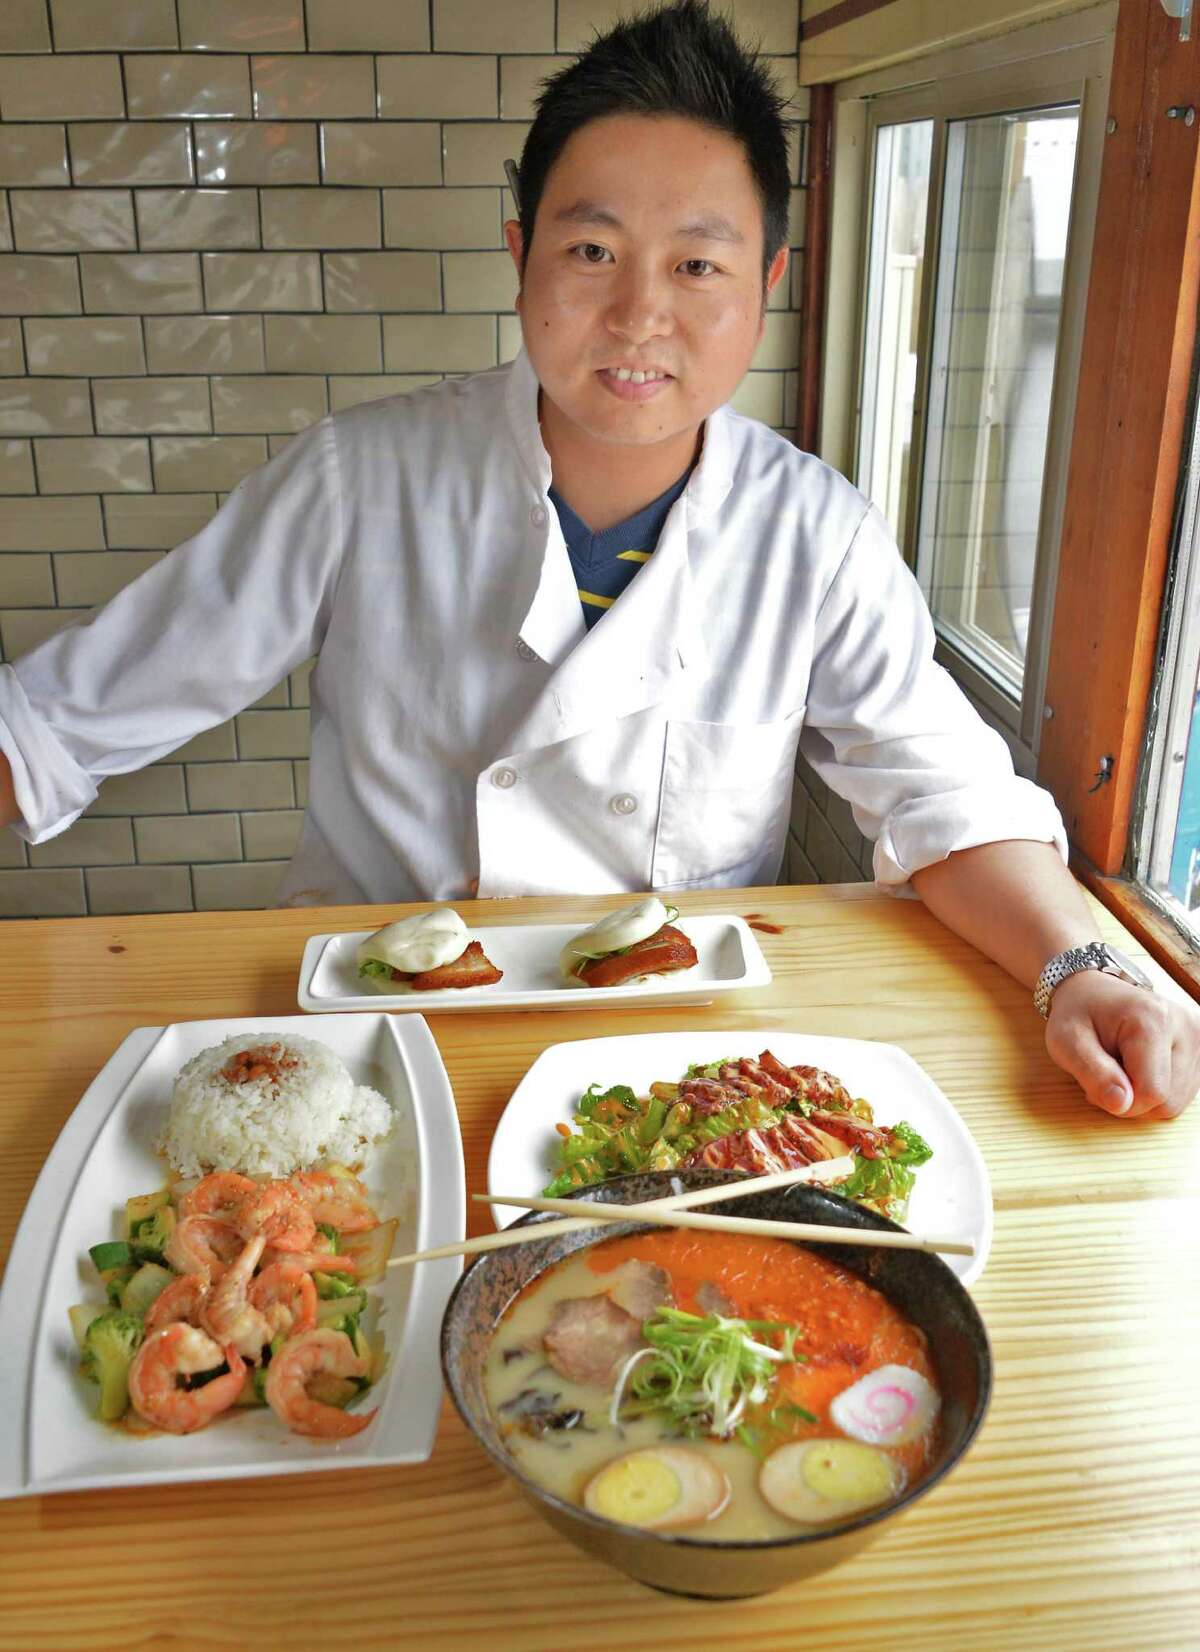 Dave Zehng with a sampling of fare at his Tanpopo ramen and sake restaurant on Broadway Saturday Oct. 3. 2015 in Albany, NY. (John Carl D'Annibale / Times Union)